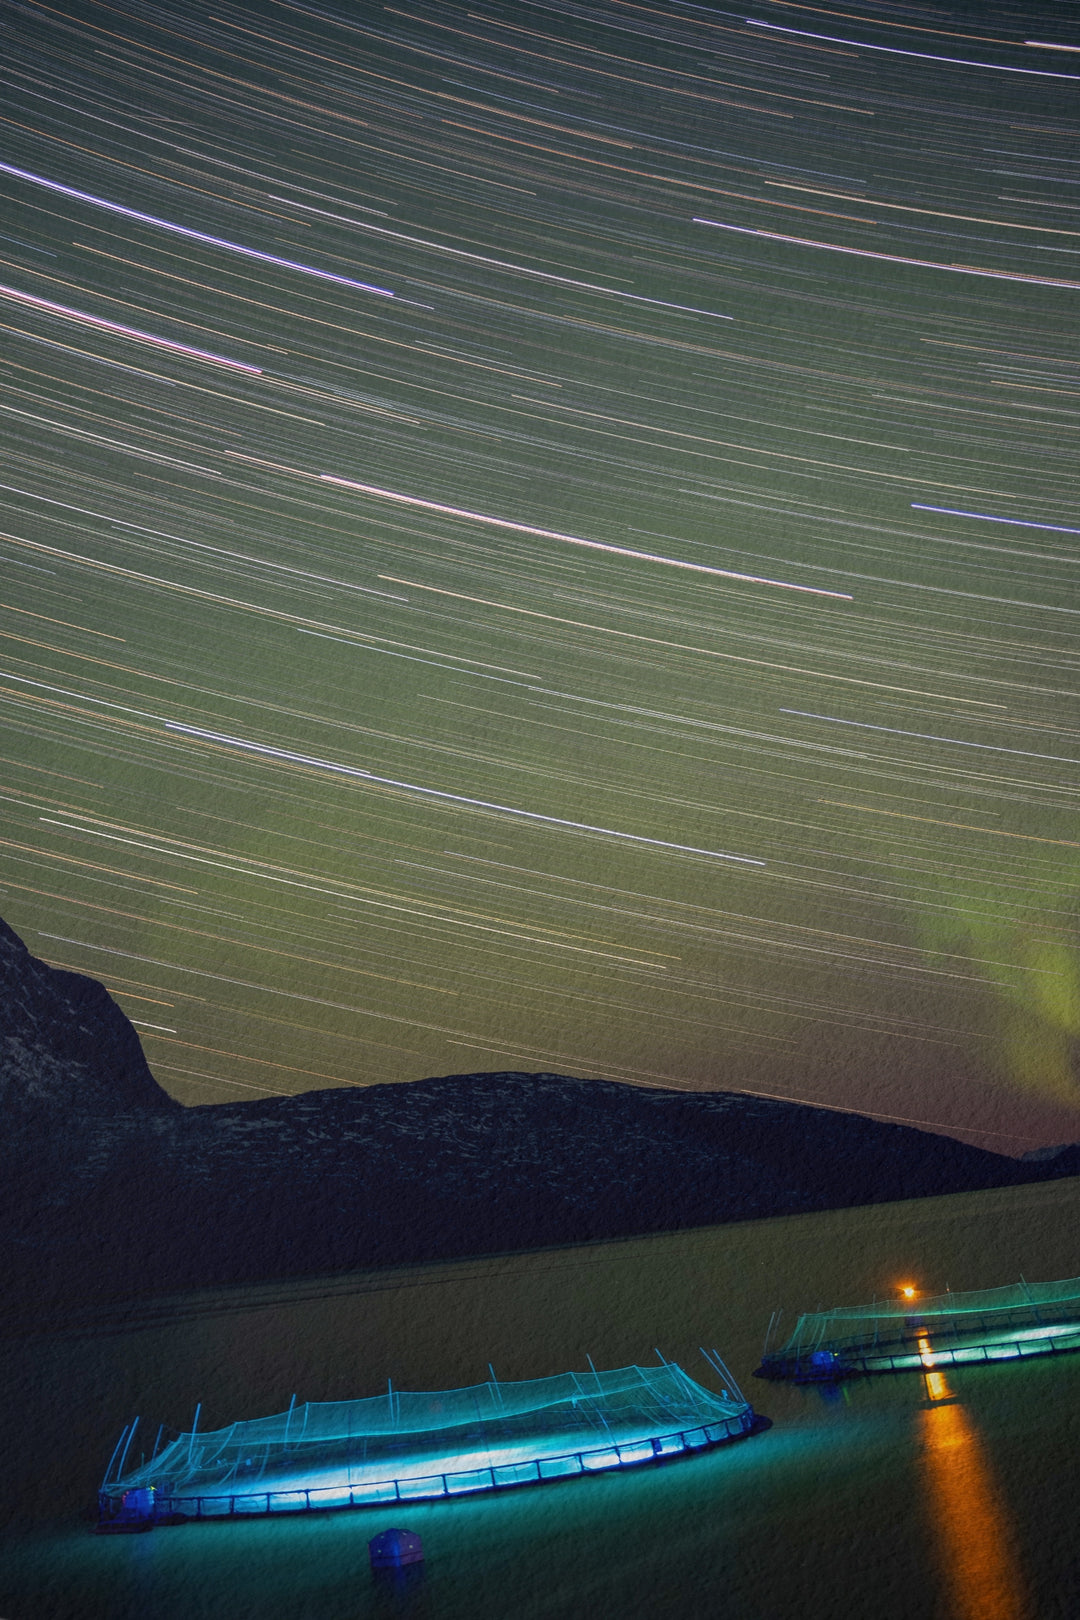 Star trails with aurora above the fish pens I - Hahnemühle Photo Rag Print